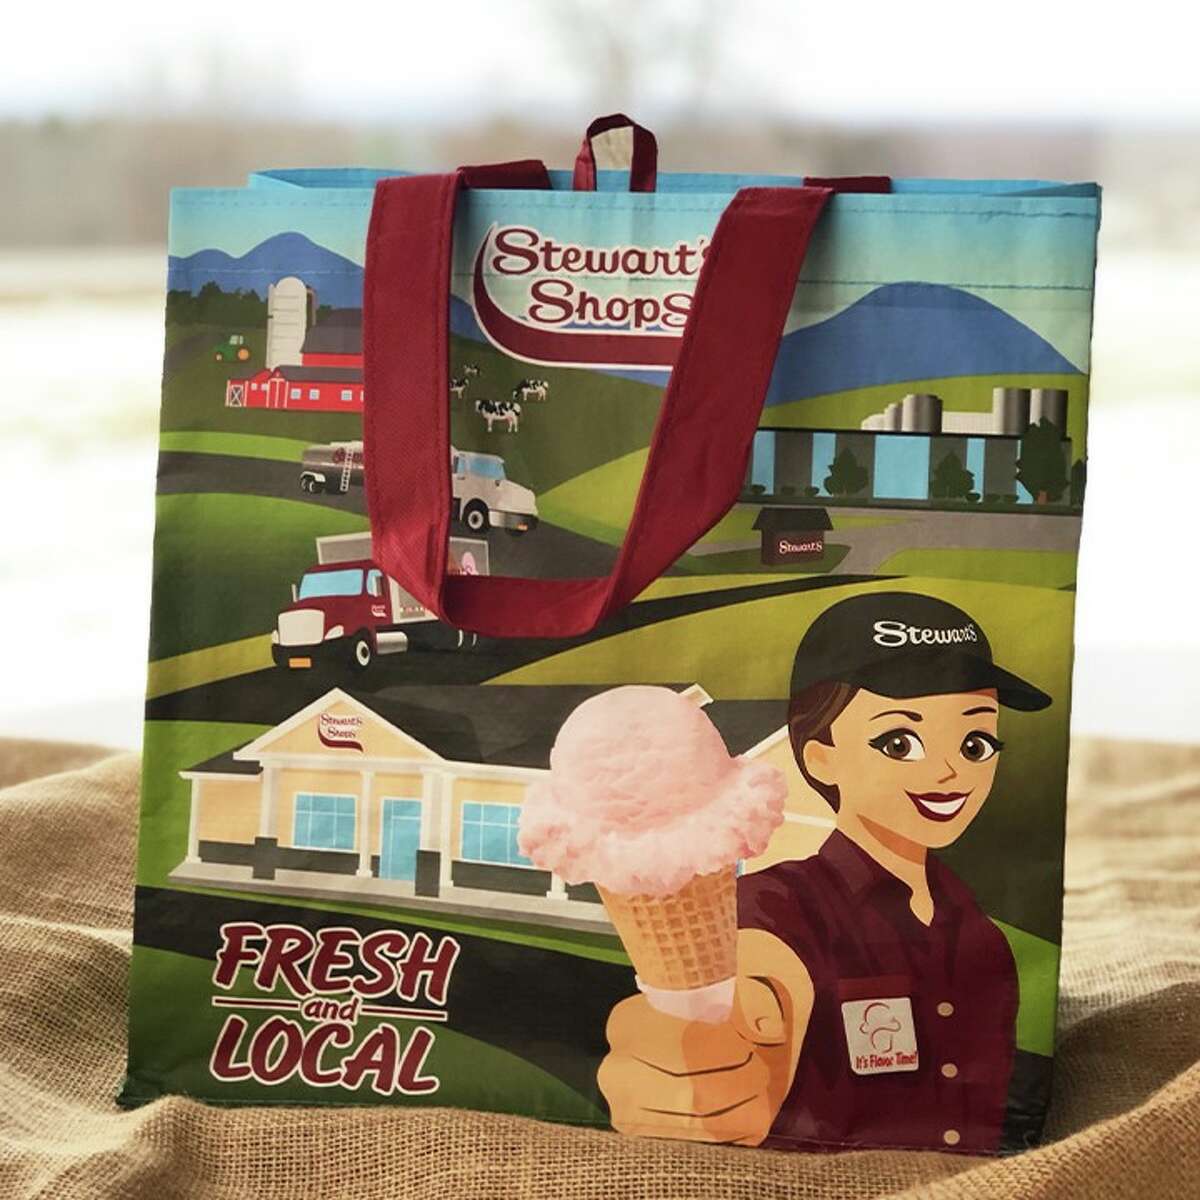 The 99 cent Stewart's Shops bag is being sold now in all stores as the company gets ready for the March 1 plastic bag ban.